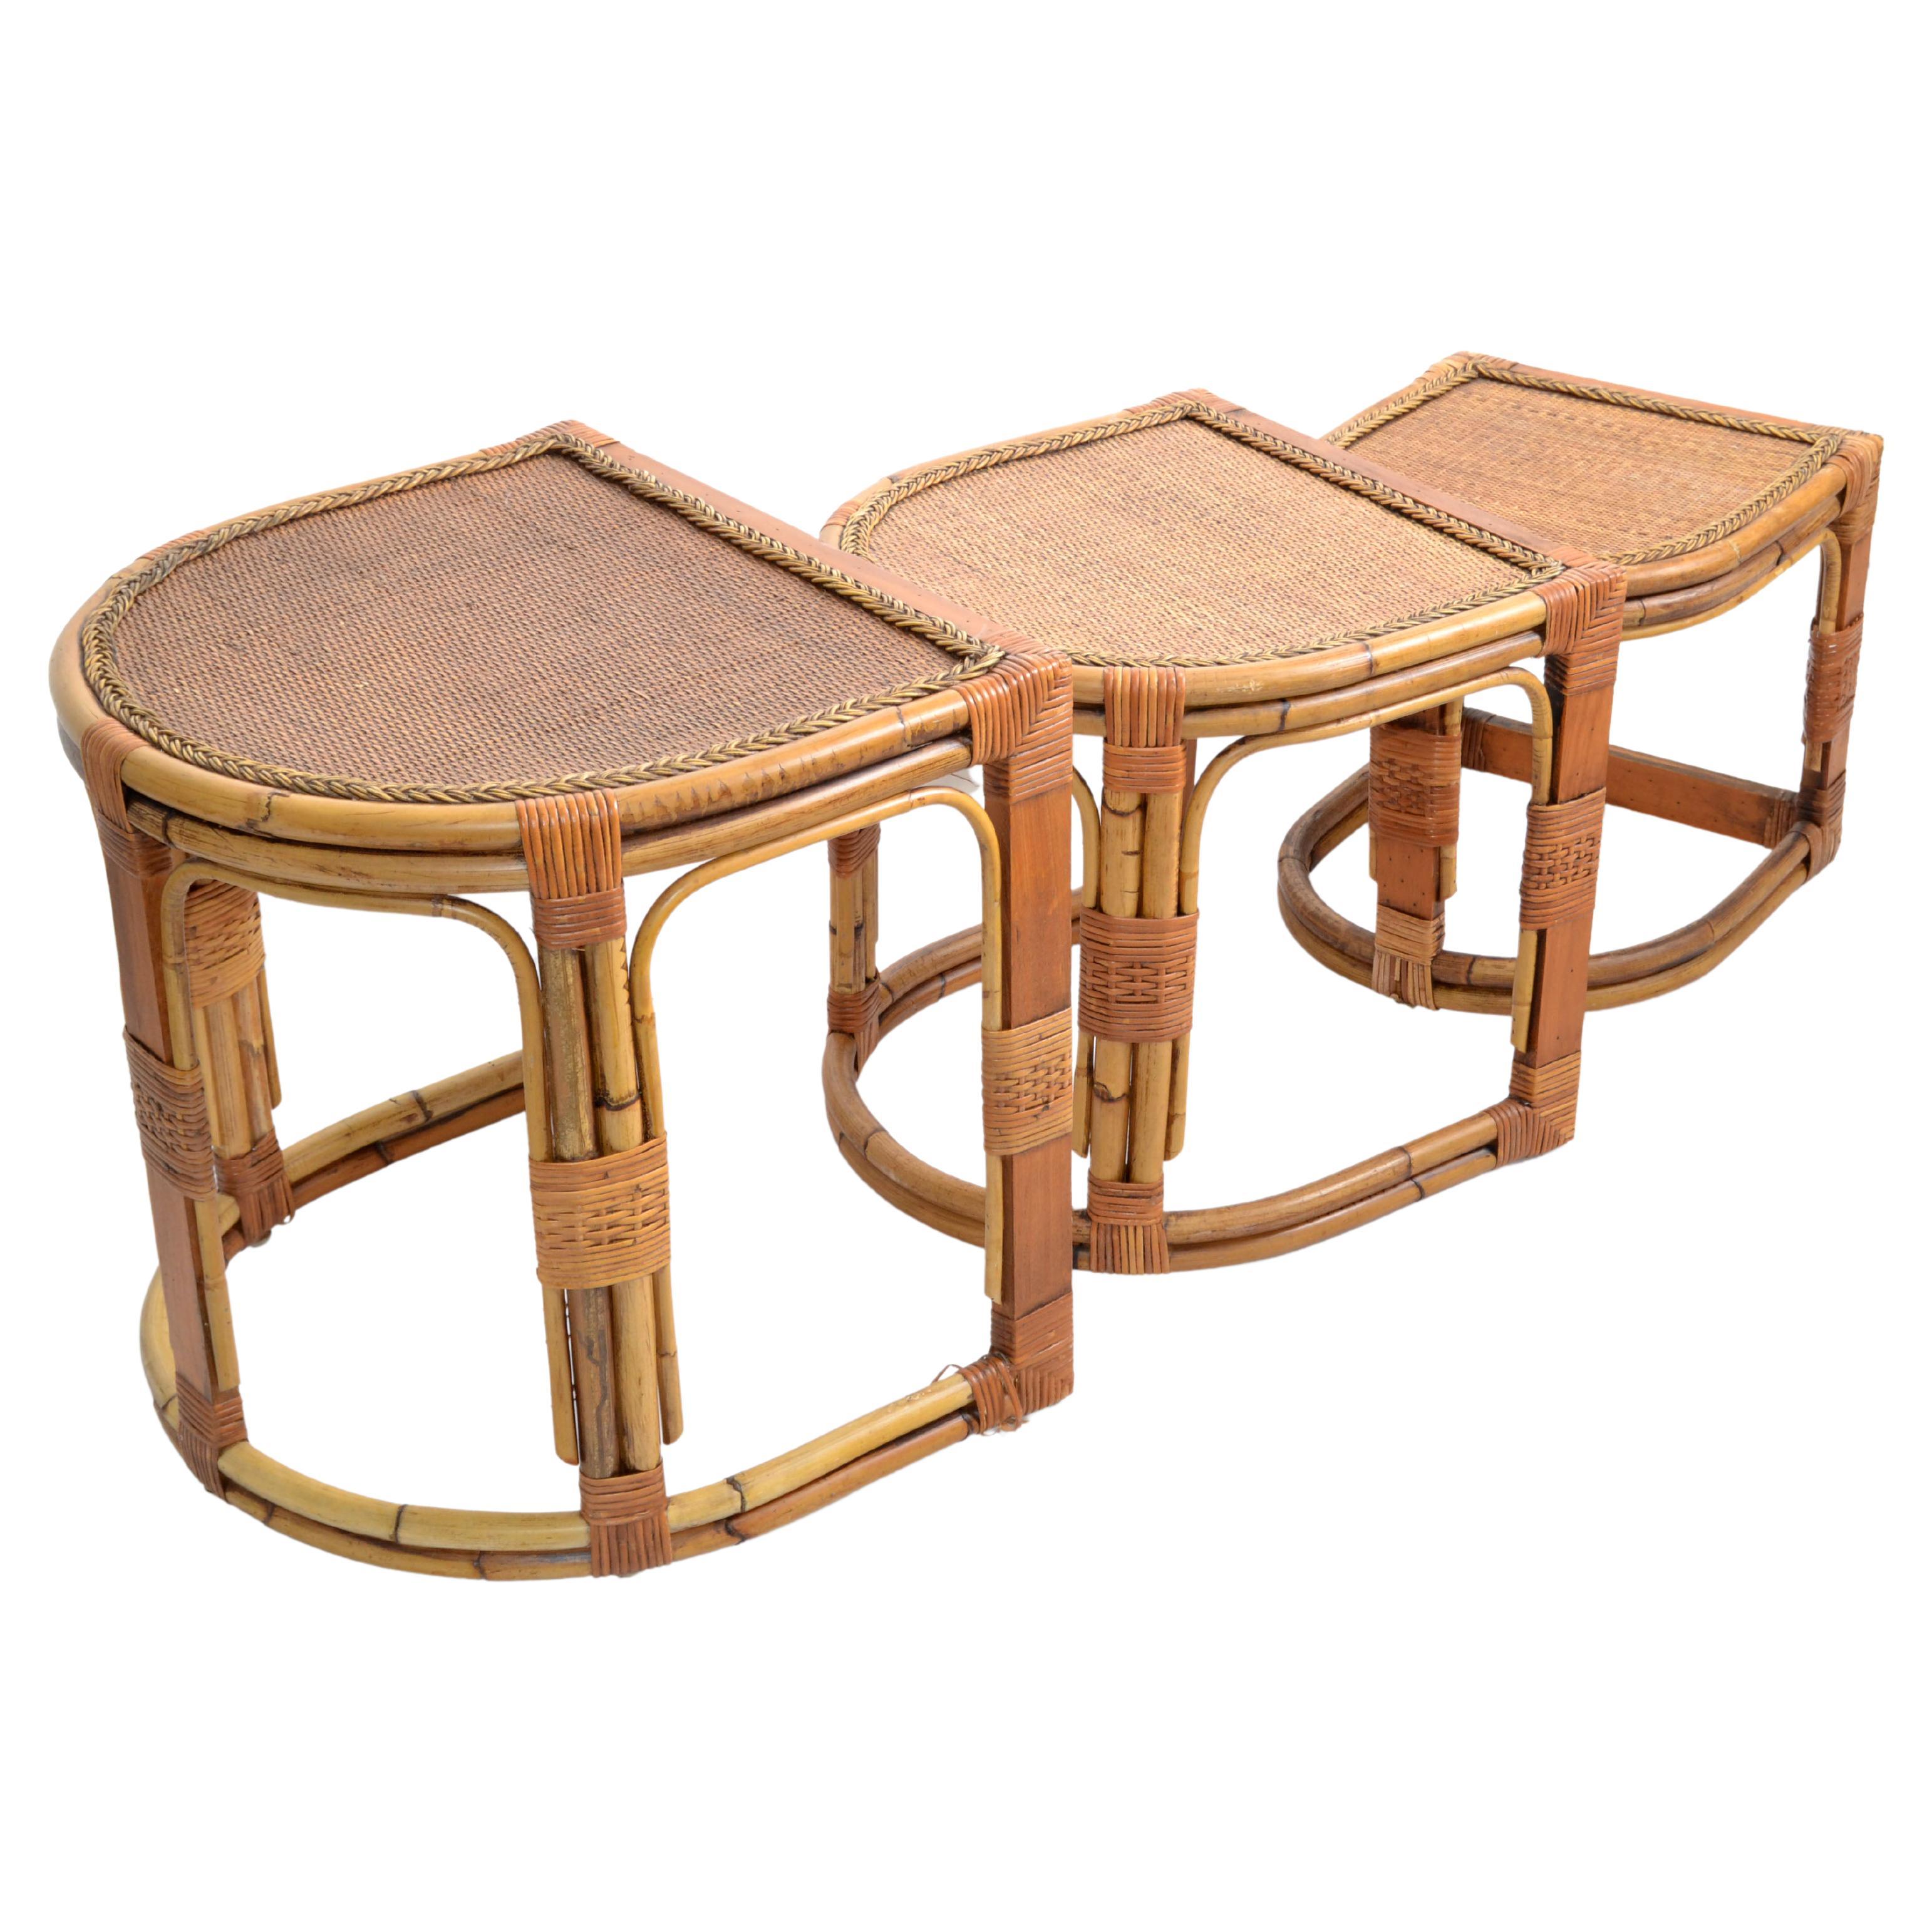 Semi-Circle Bamboo & Cane Nesting Tables / Stacking Tables Handcrafted, Set of 3